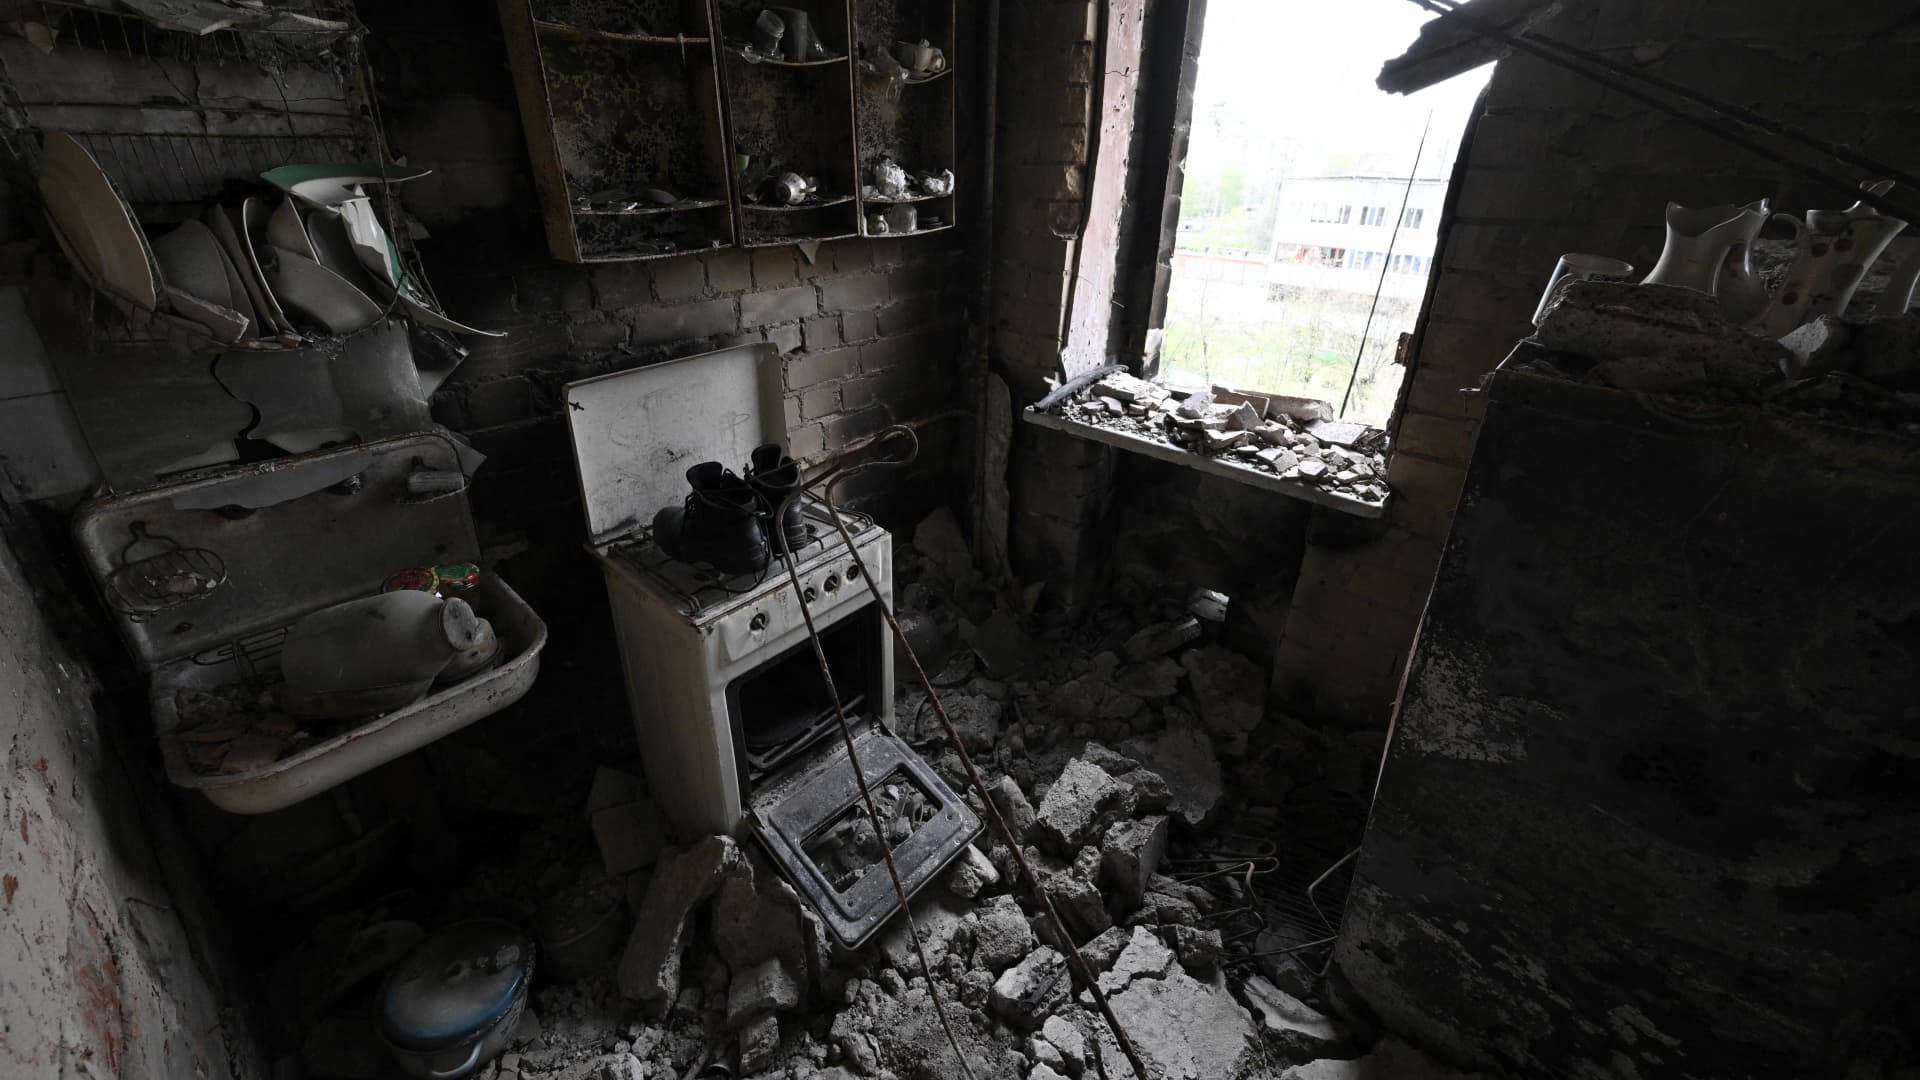 A photograph taken on May 3, 2022 shows a charred kitchen in of a destroyed flat in a heavily damaged residential building in the northern Ukrainian city of Chernihiv, amid the Russian invasion of Ukraine.